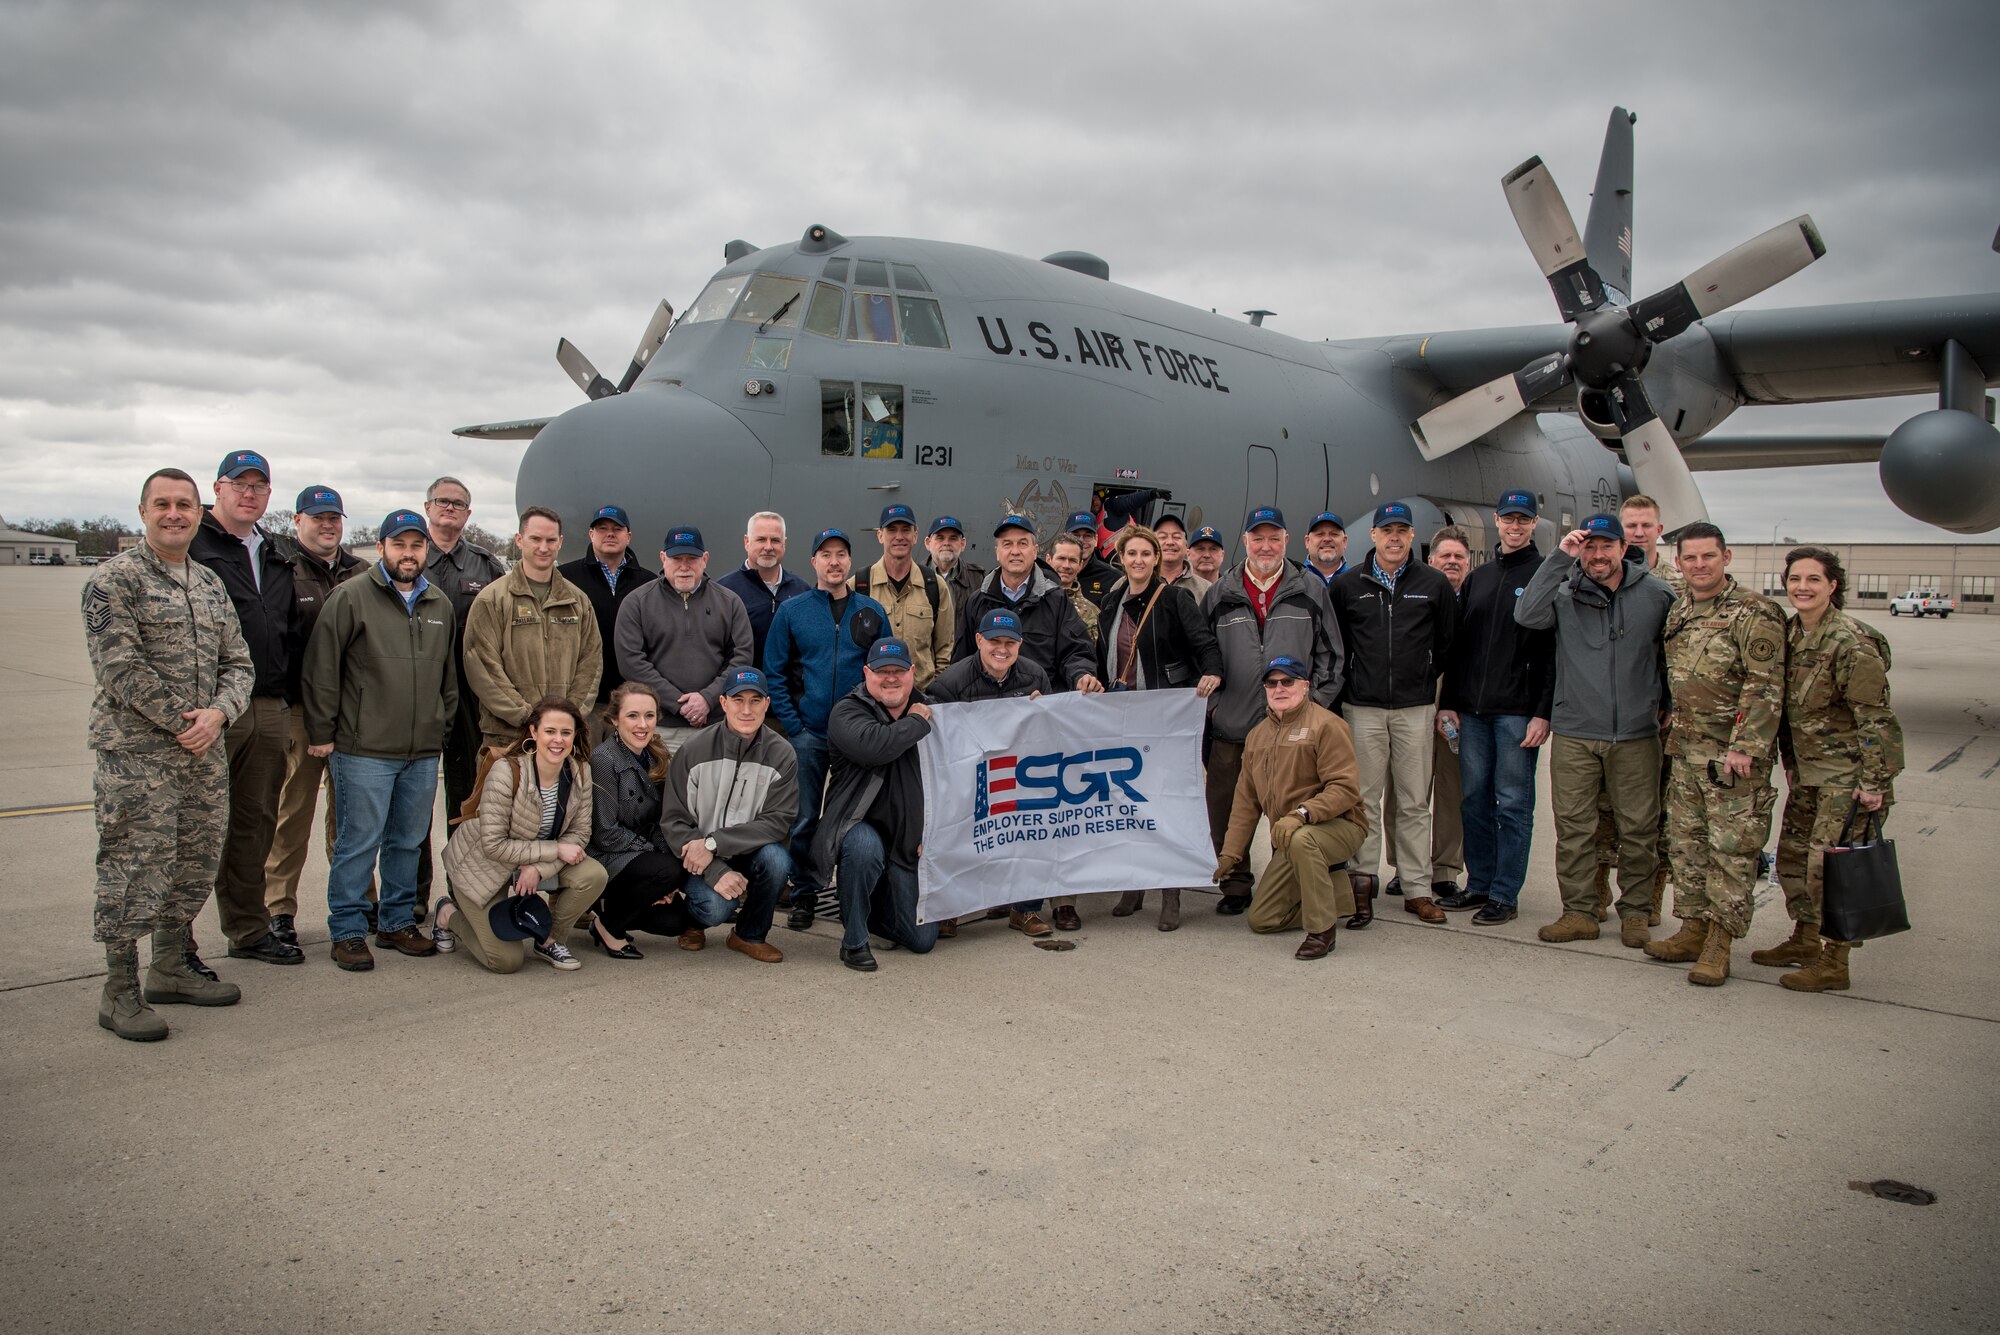 More than two-dozen civilian employers stand in front of a Kentucky Air National Guard C-130 Hercules aircraft at Wright-Patterson Air Force Base, Ohio, March 15, 2019, with Airmen from the 123rd Airlift Wing and representatives of the Kentucky Committee for Employer Support of the Guard and Reserve The employers were participating in an ESGR “Bosslift,” which enhances awareness and understanding between National Guardsmen and the civilian employers for whom they work when they’re not on duty. (U.S. Air National Guard photo by Staff Sgt. Joshua Horton)